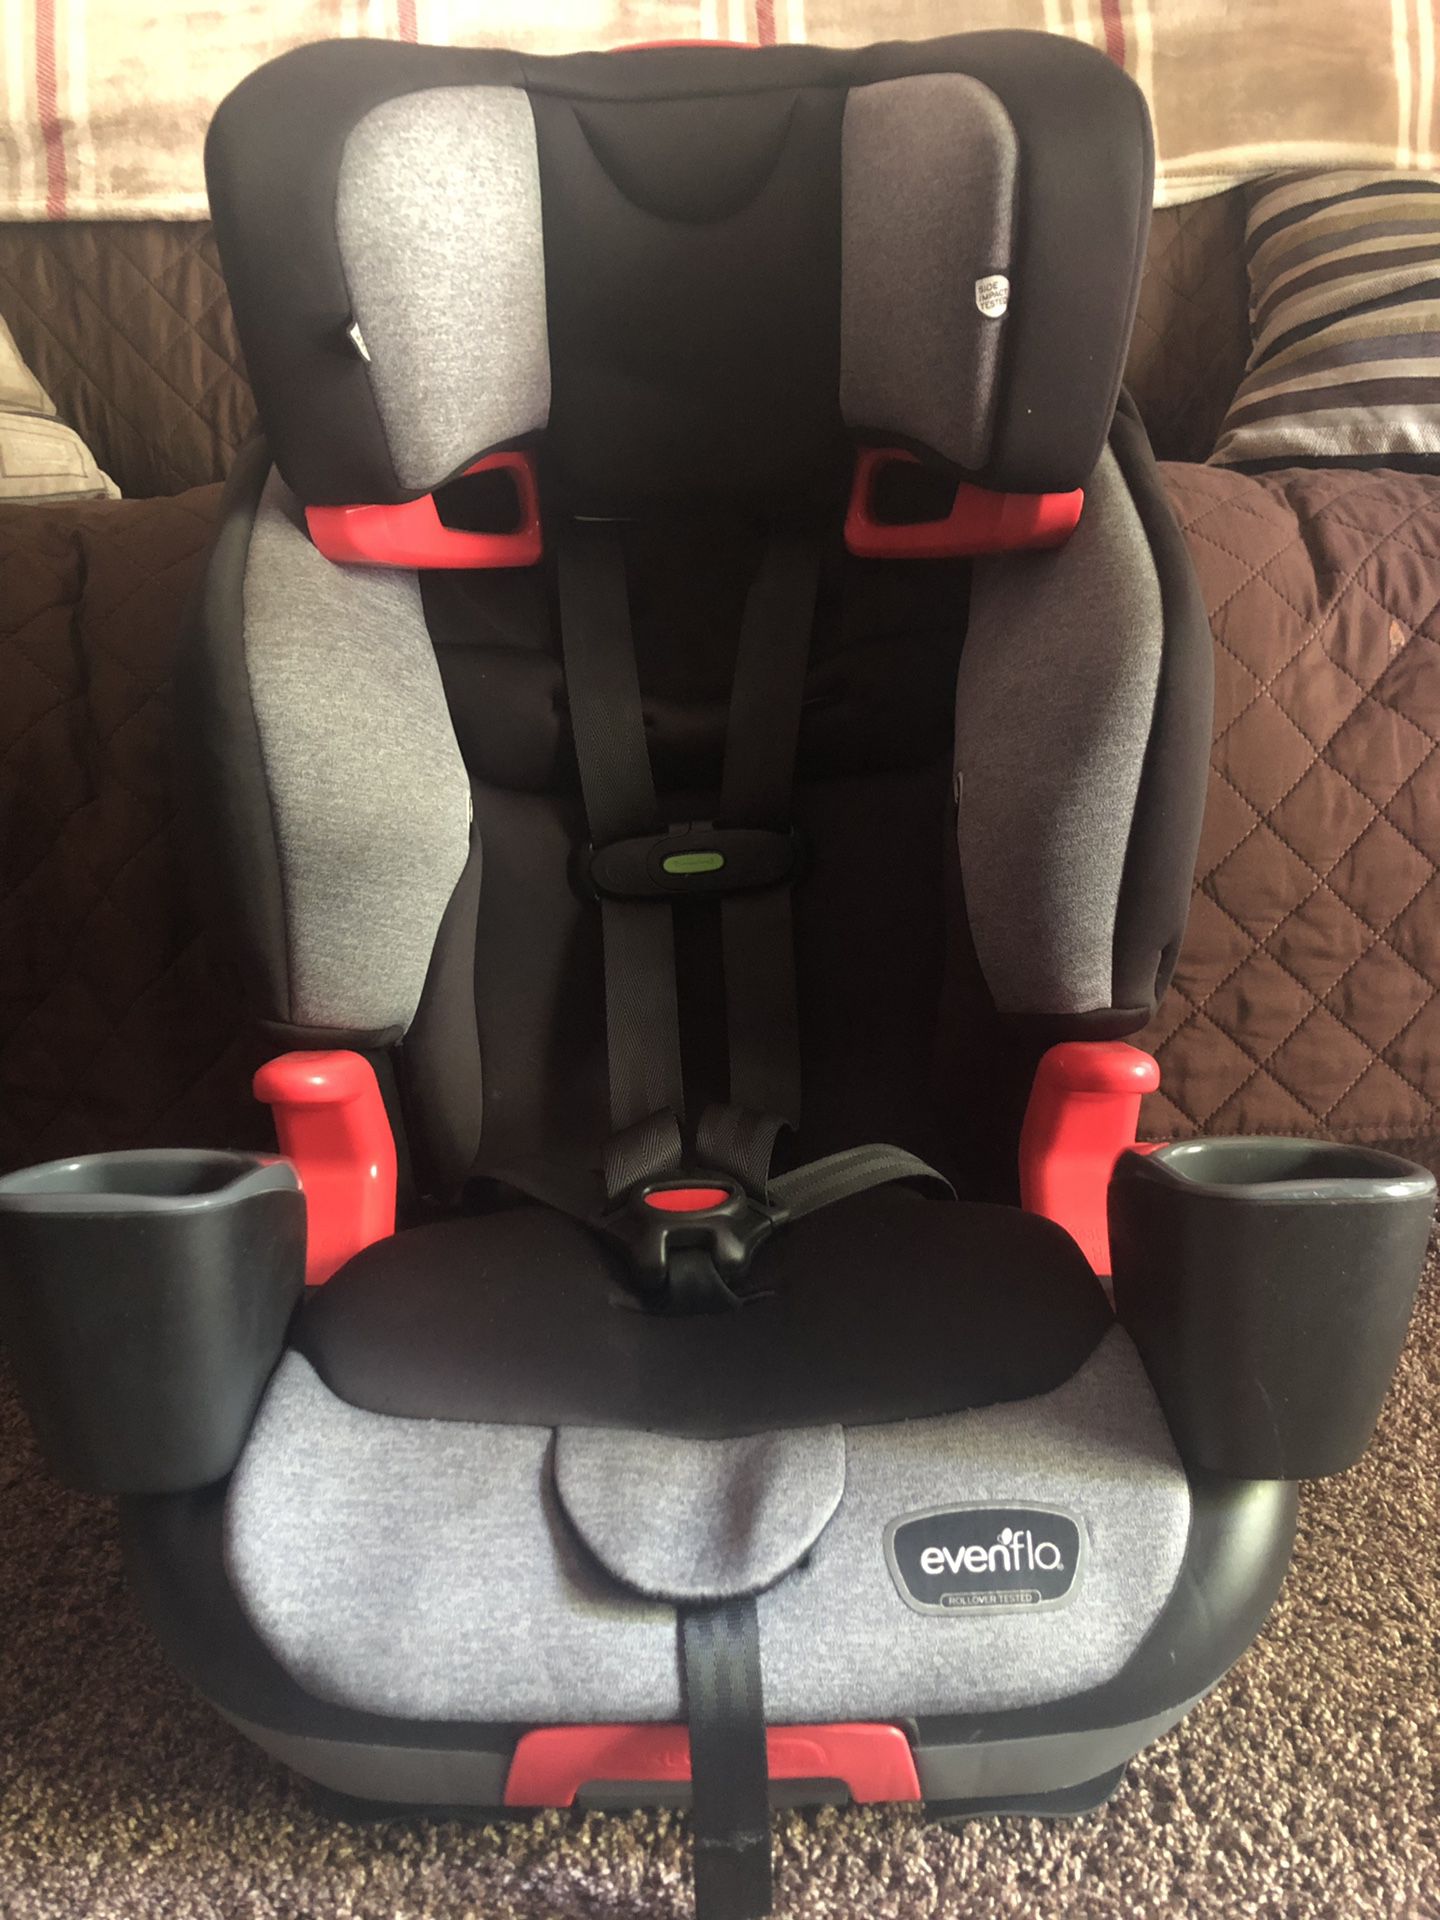 Evenflo all in one car seat